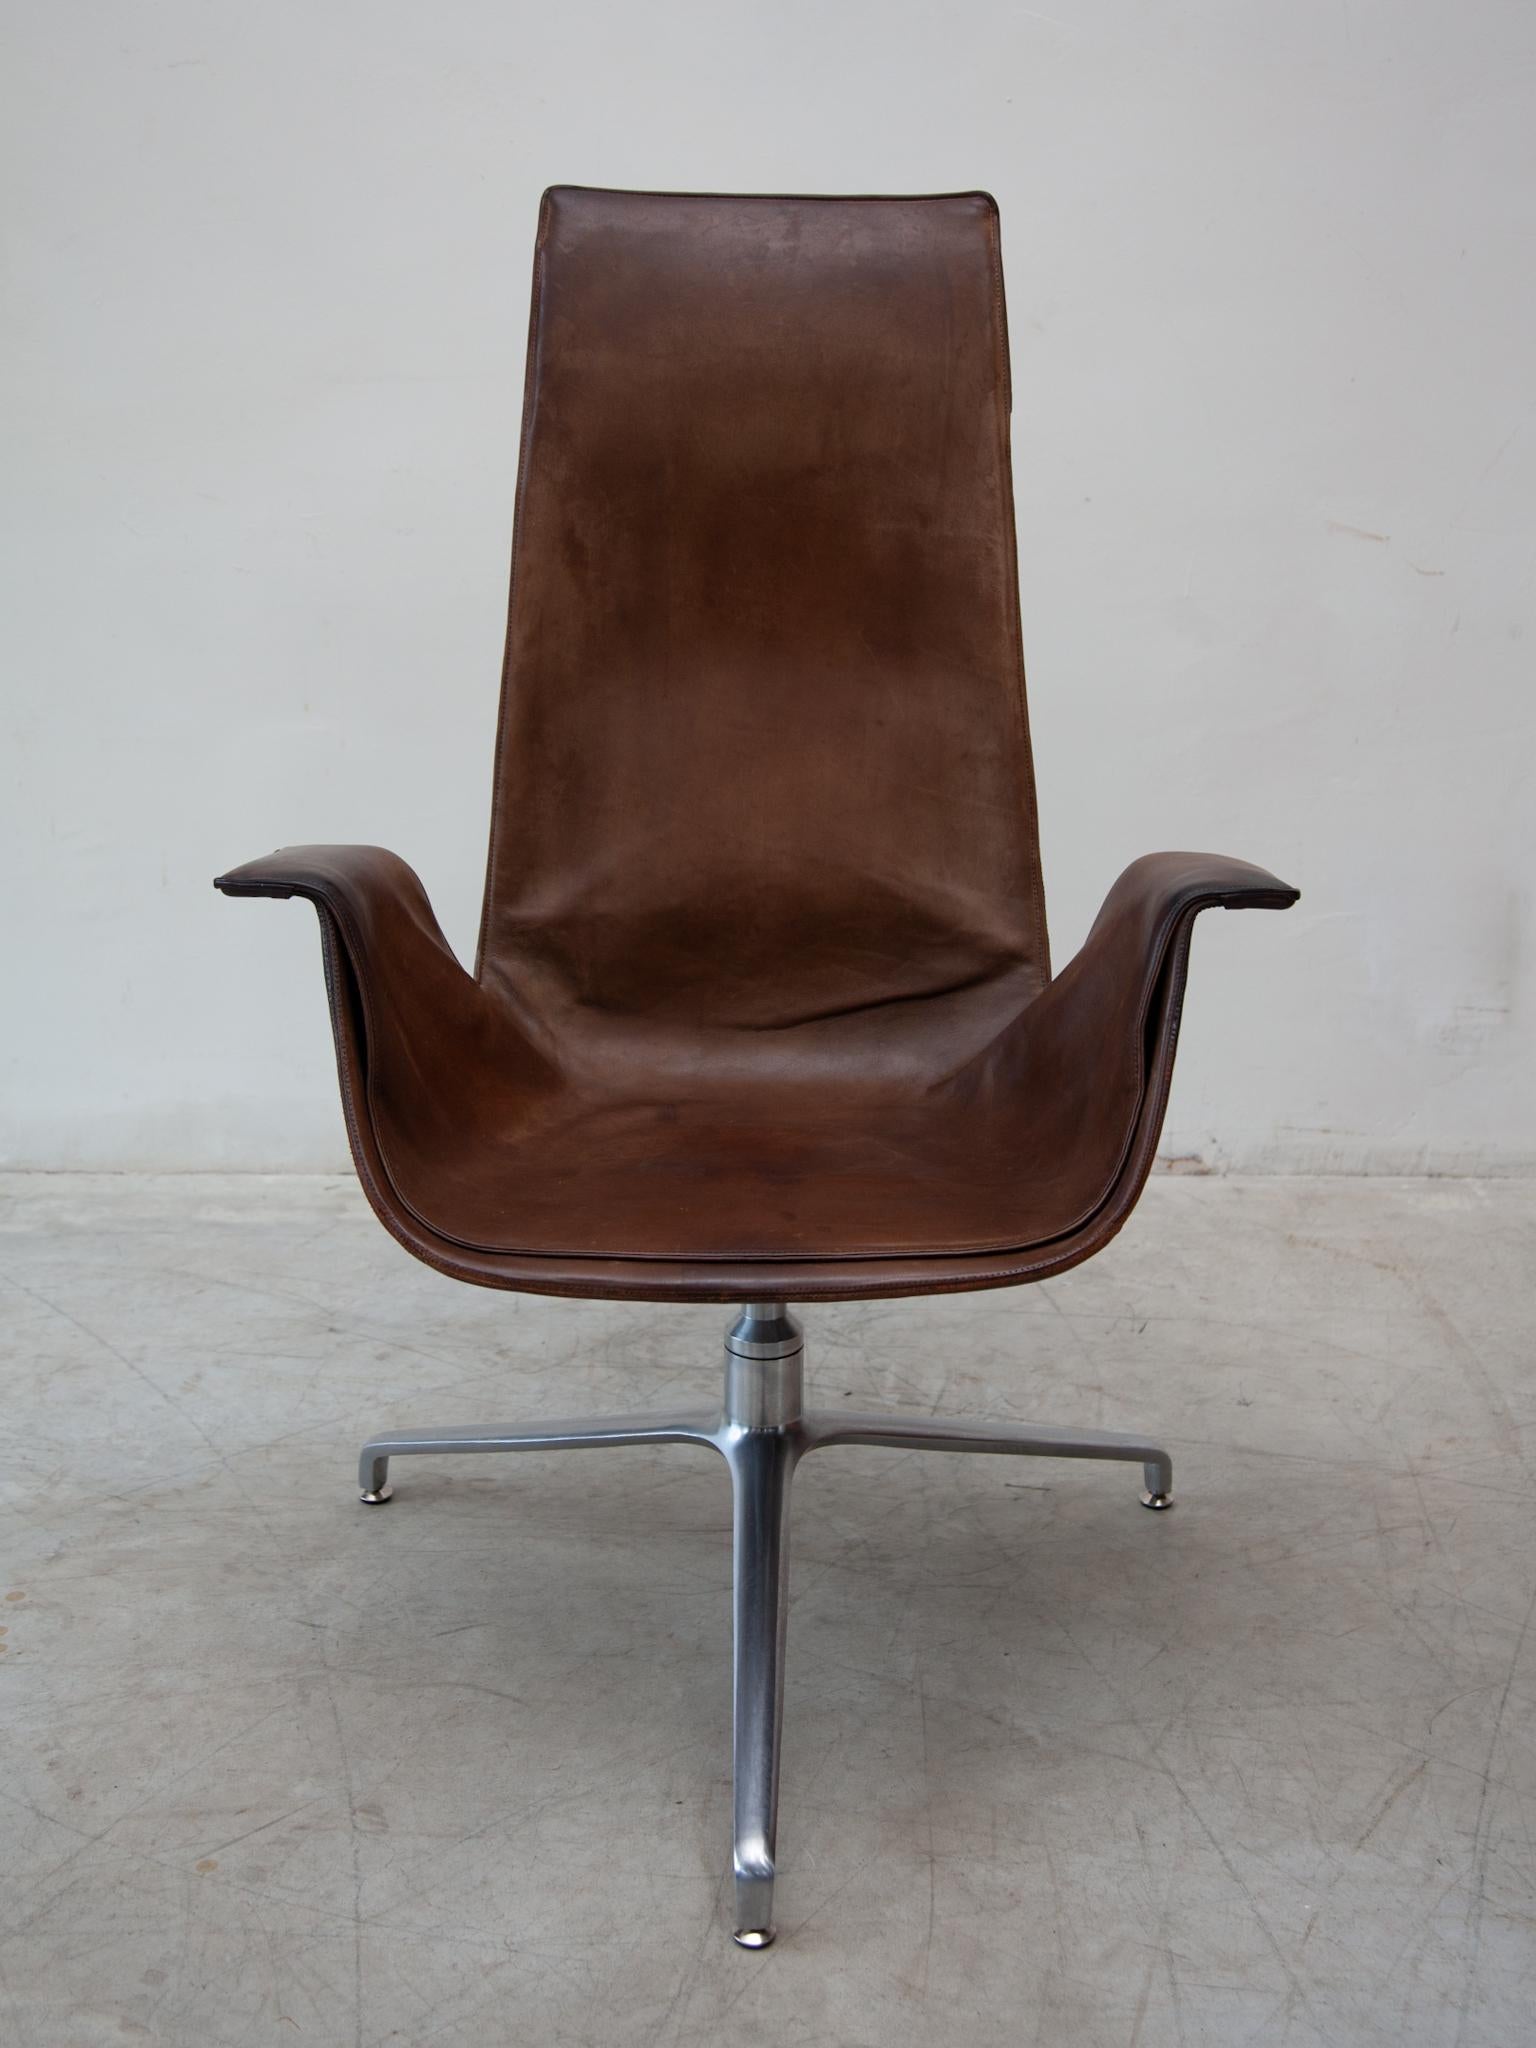 Scandinavian Modern Fabricius & Kastholm FK6725 Desk, Lounge Chair in Brown Leather, Kill For Sale